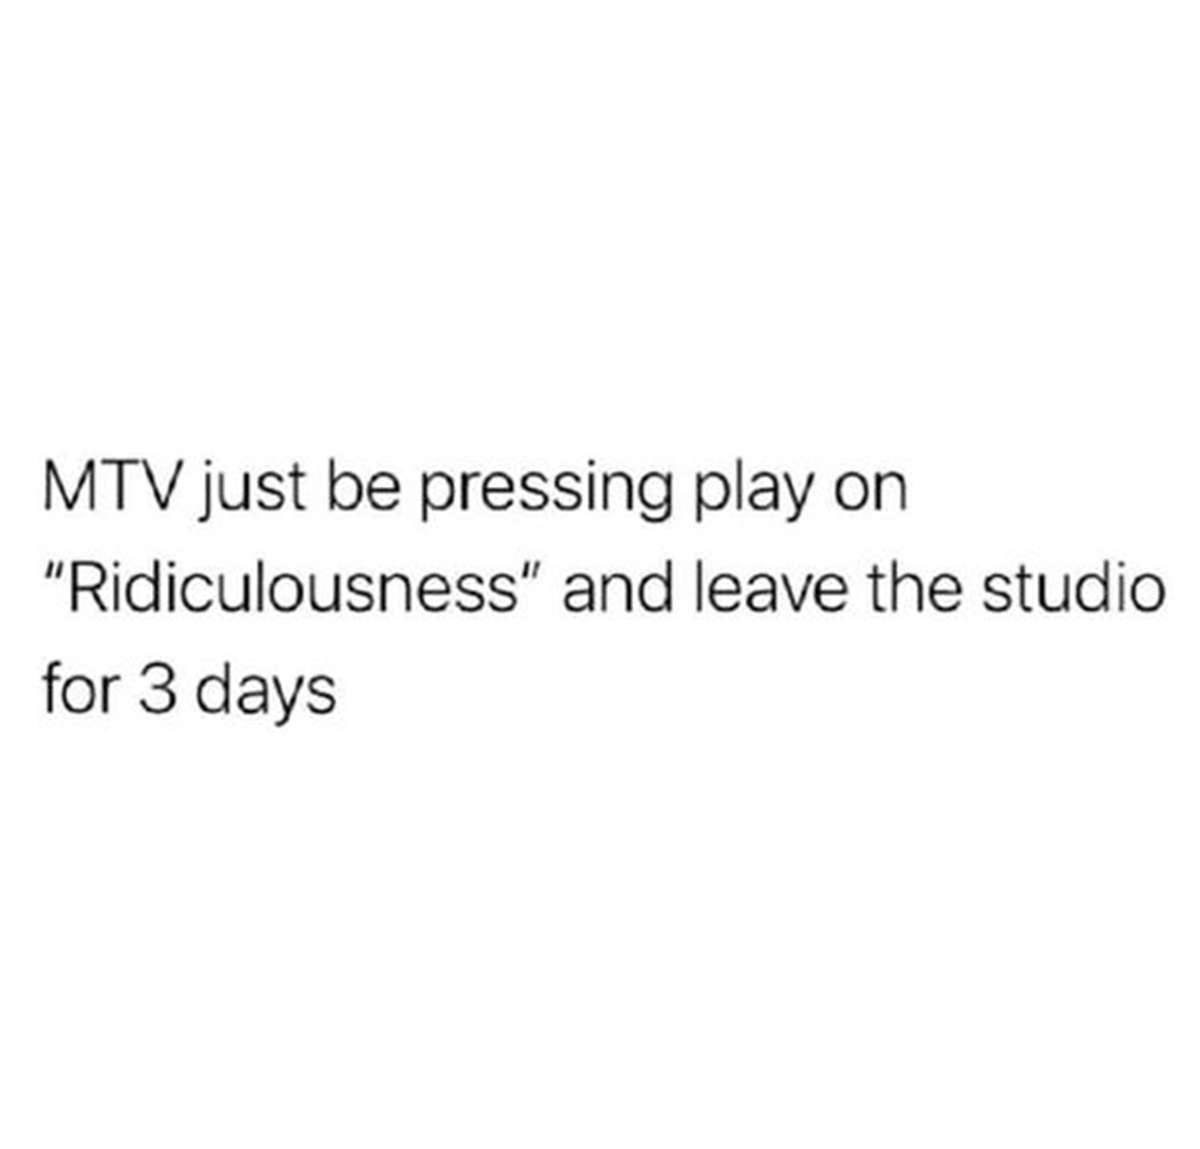 Mtv just be pressing play on "Ridiculousness" and leave the studio for 3 days